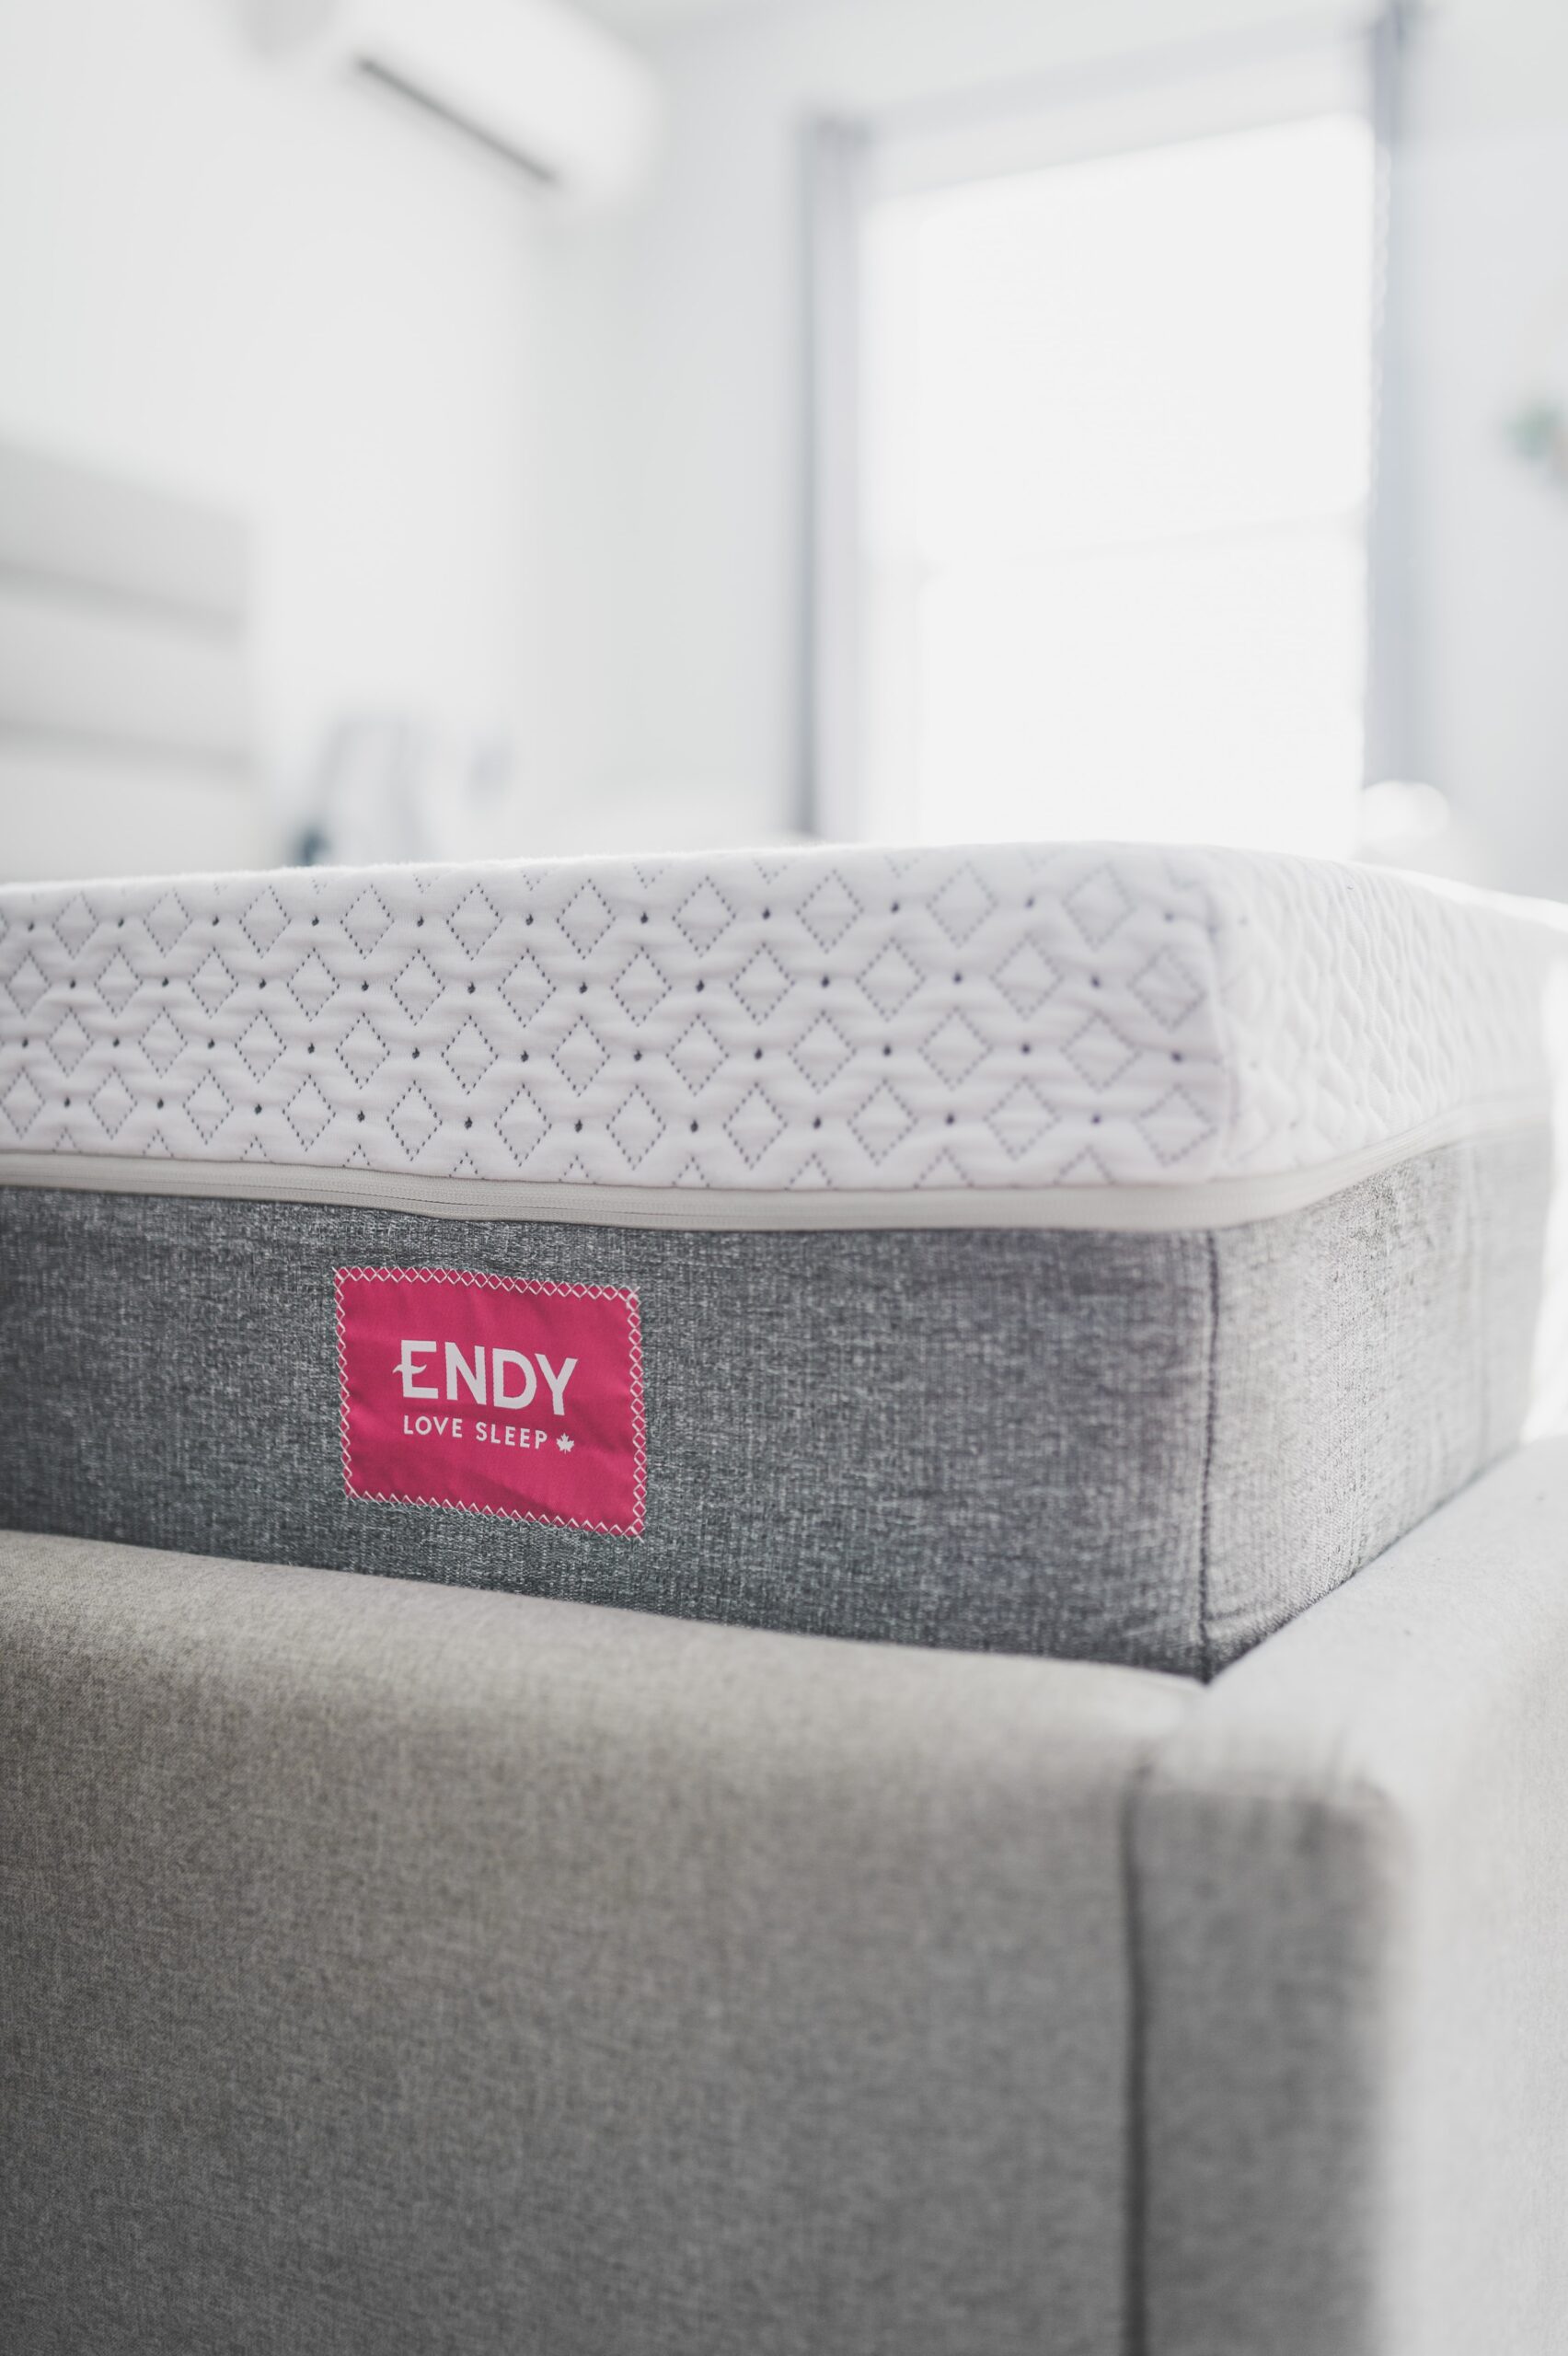 100 Night Review Of The Endy Mattress